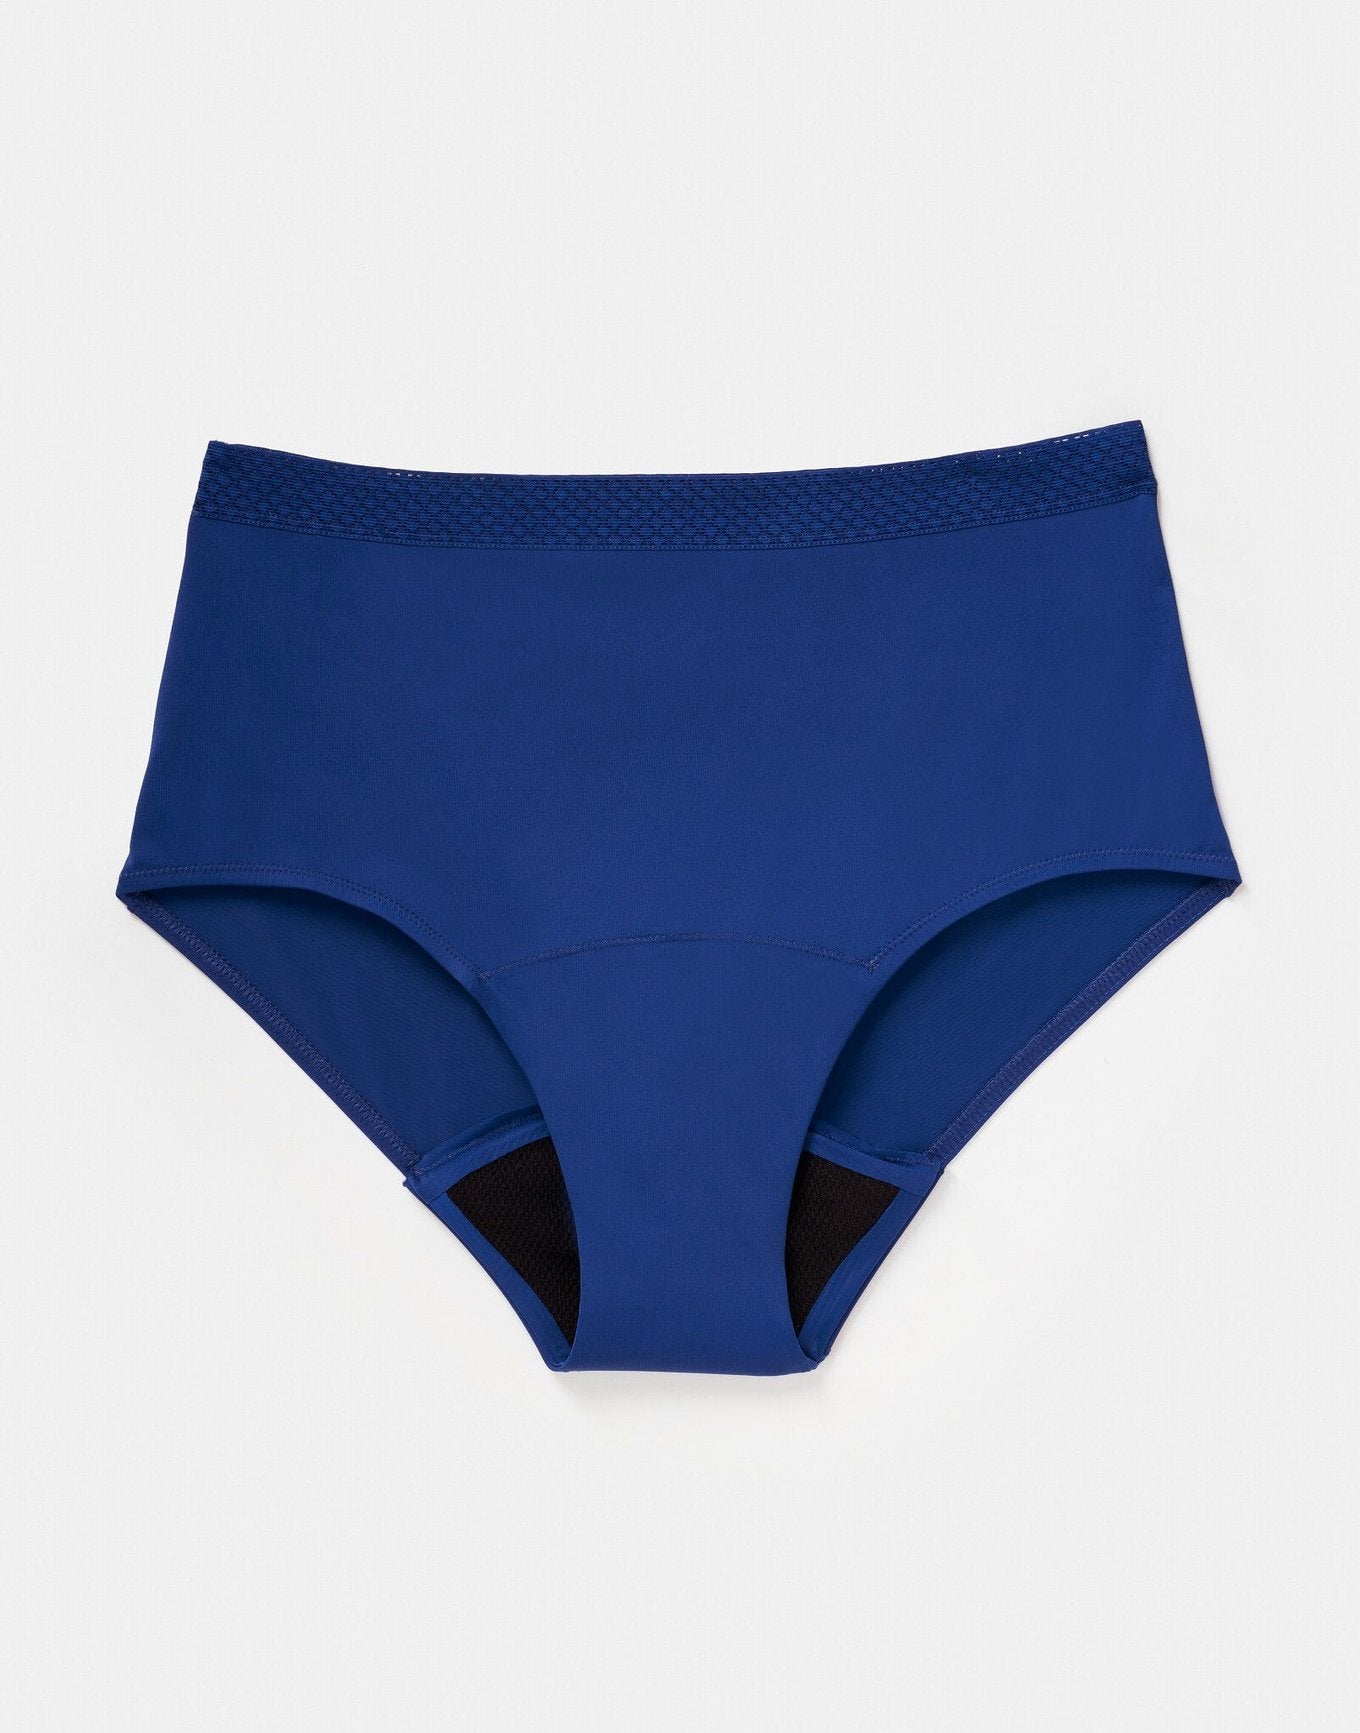 Joyja Jess period-proof panty in color Sodalite Blue and shape high waisted